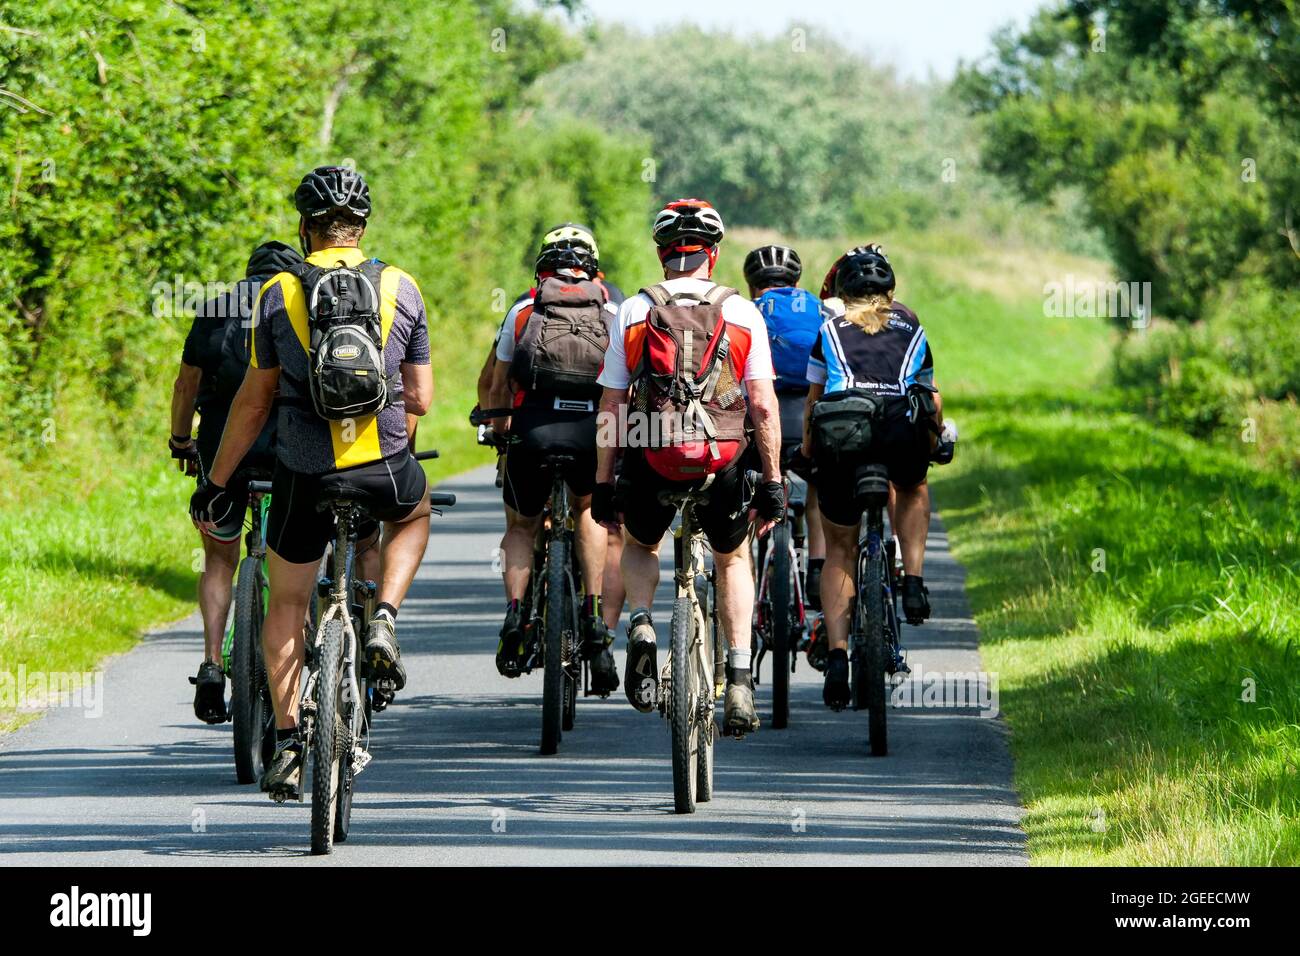 Bicycle riders, Le Grand Vey, Manche department, Cotentin, Normandy Region, France Stock Photo